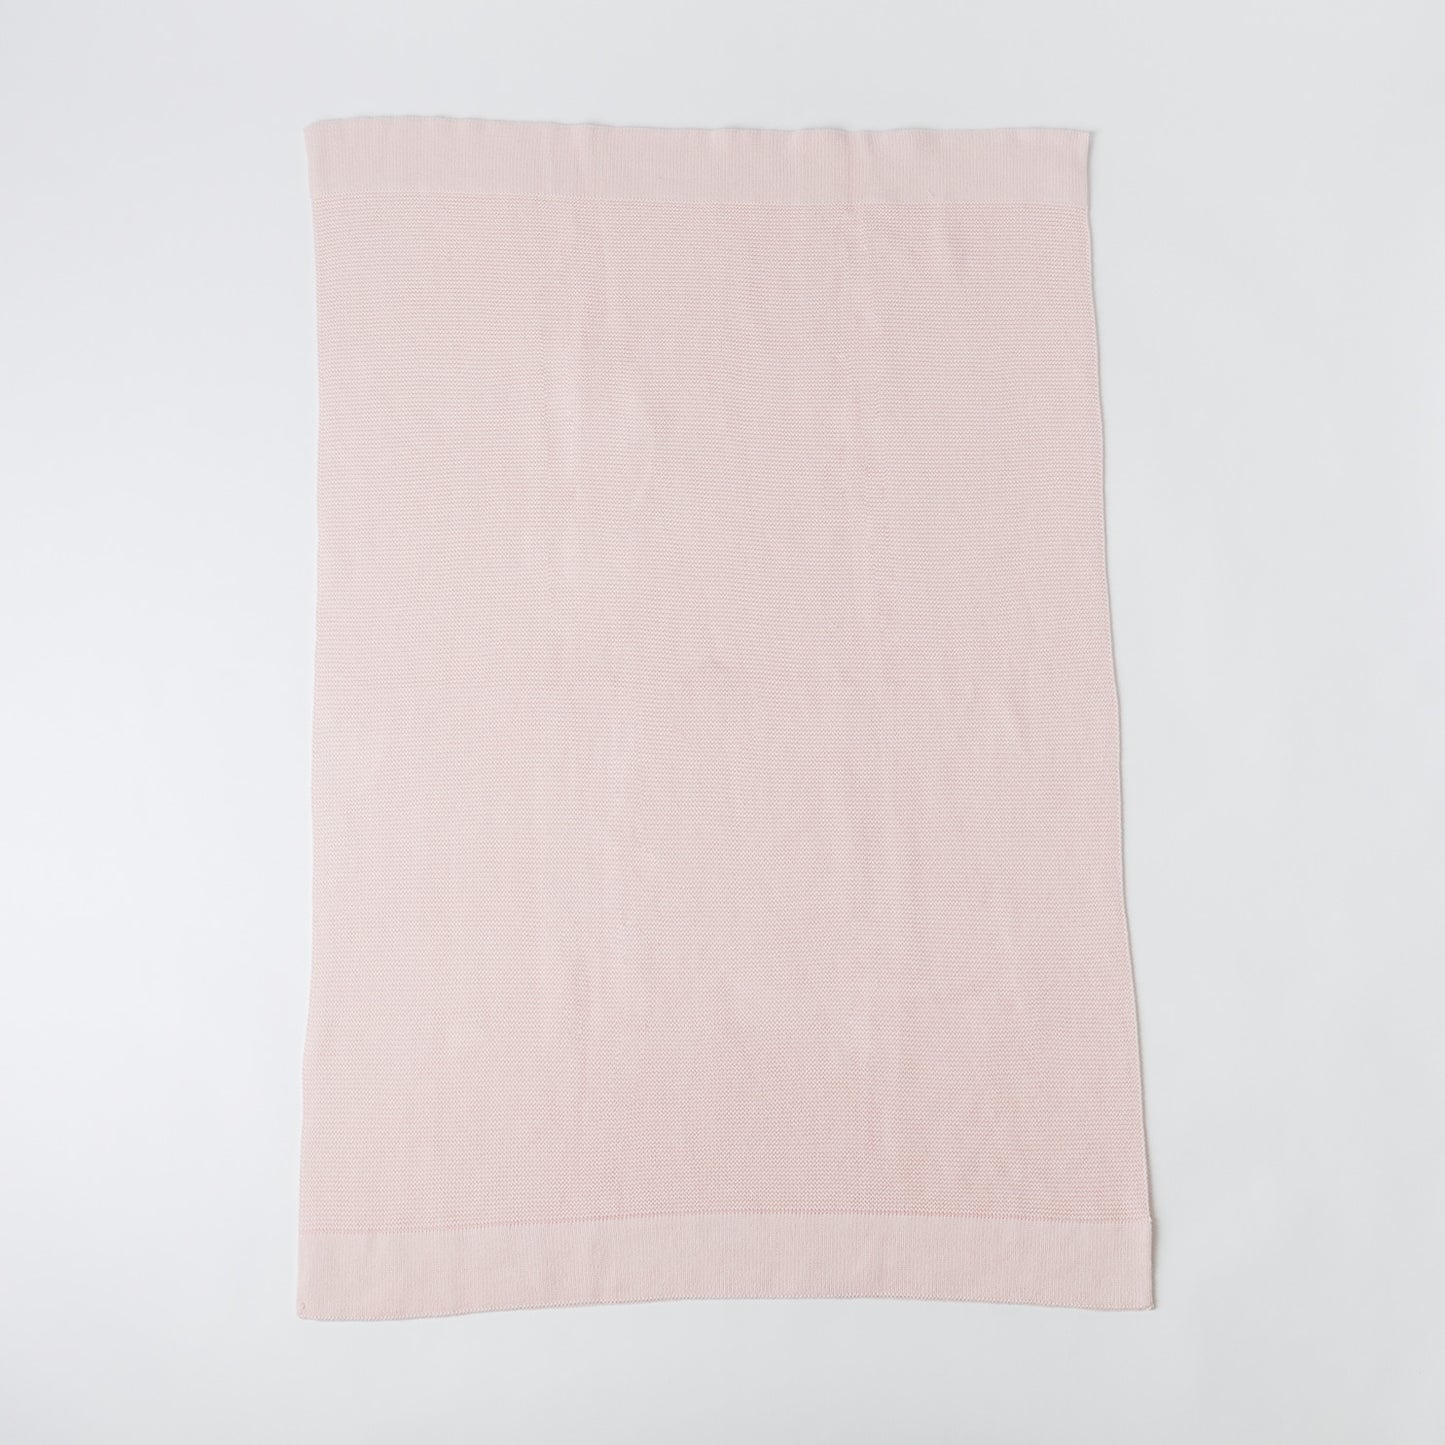 Soft Pink Sweater Knit Cotton Baby Blanket